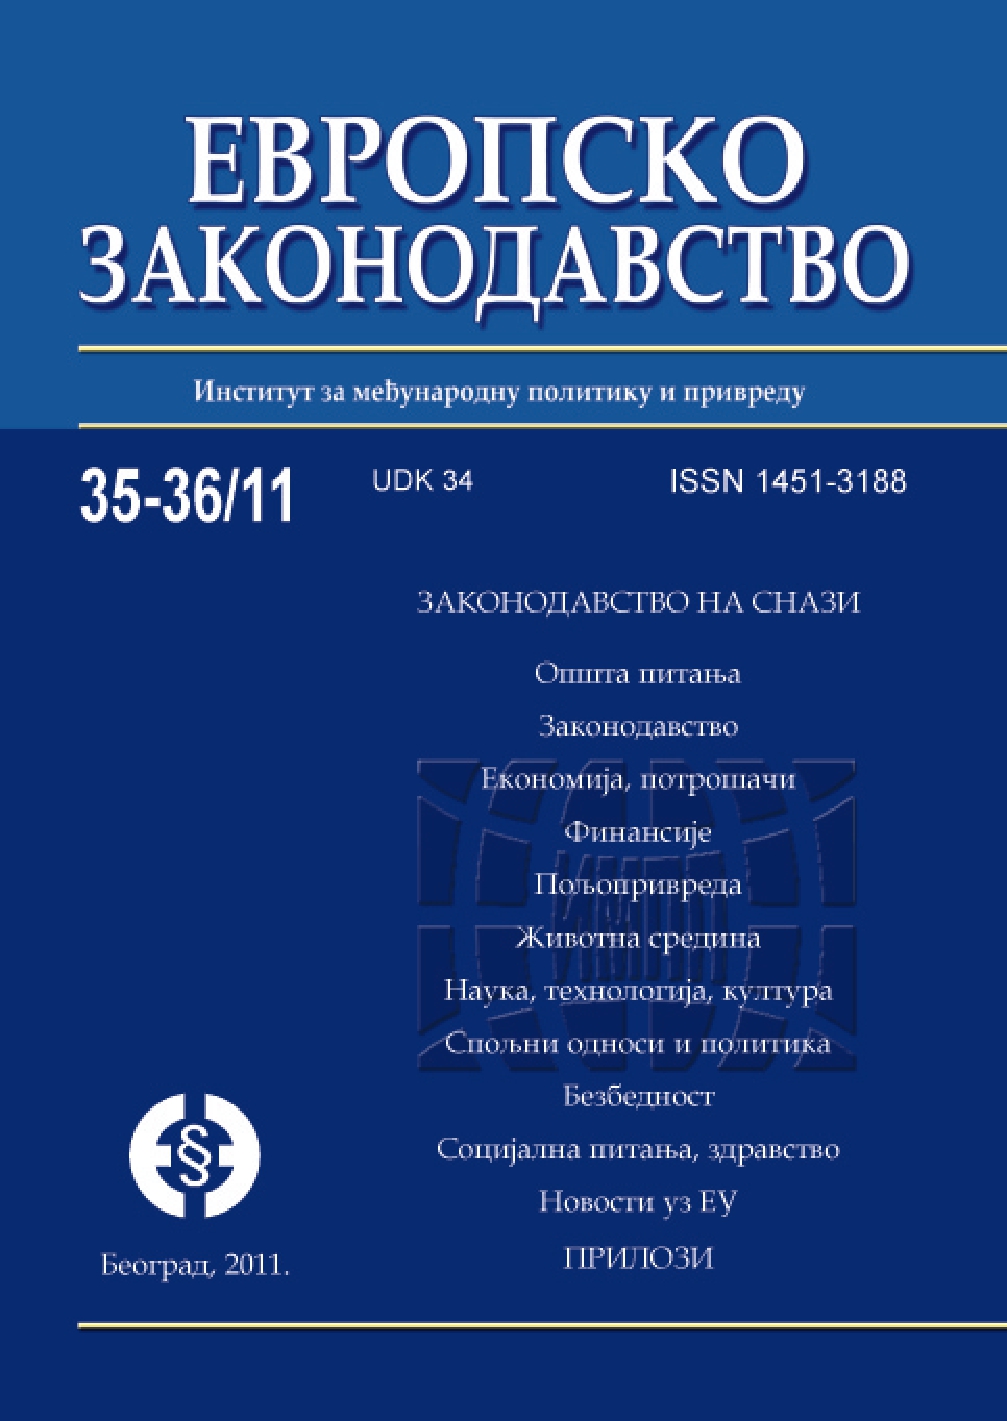 Regulation (EC) No 1394/2007 of the European Parliament and of the Council on advanced therapy medicinal products Cover Image